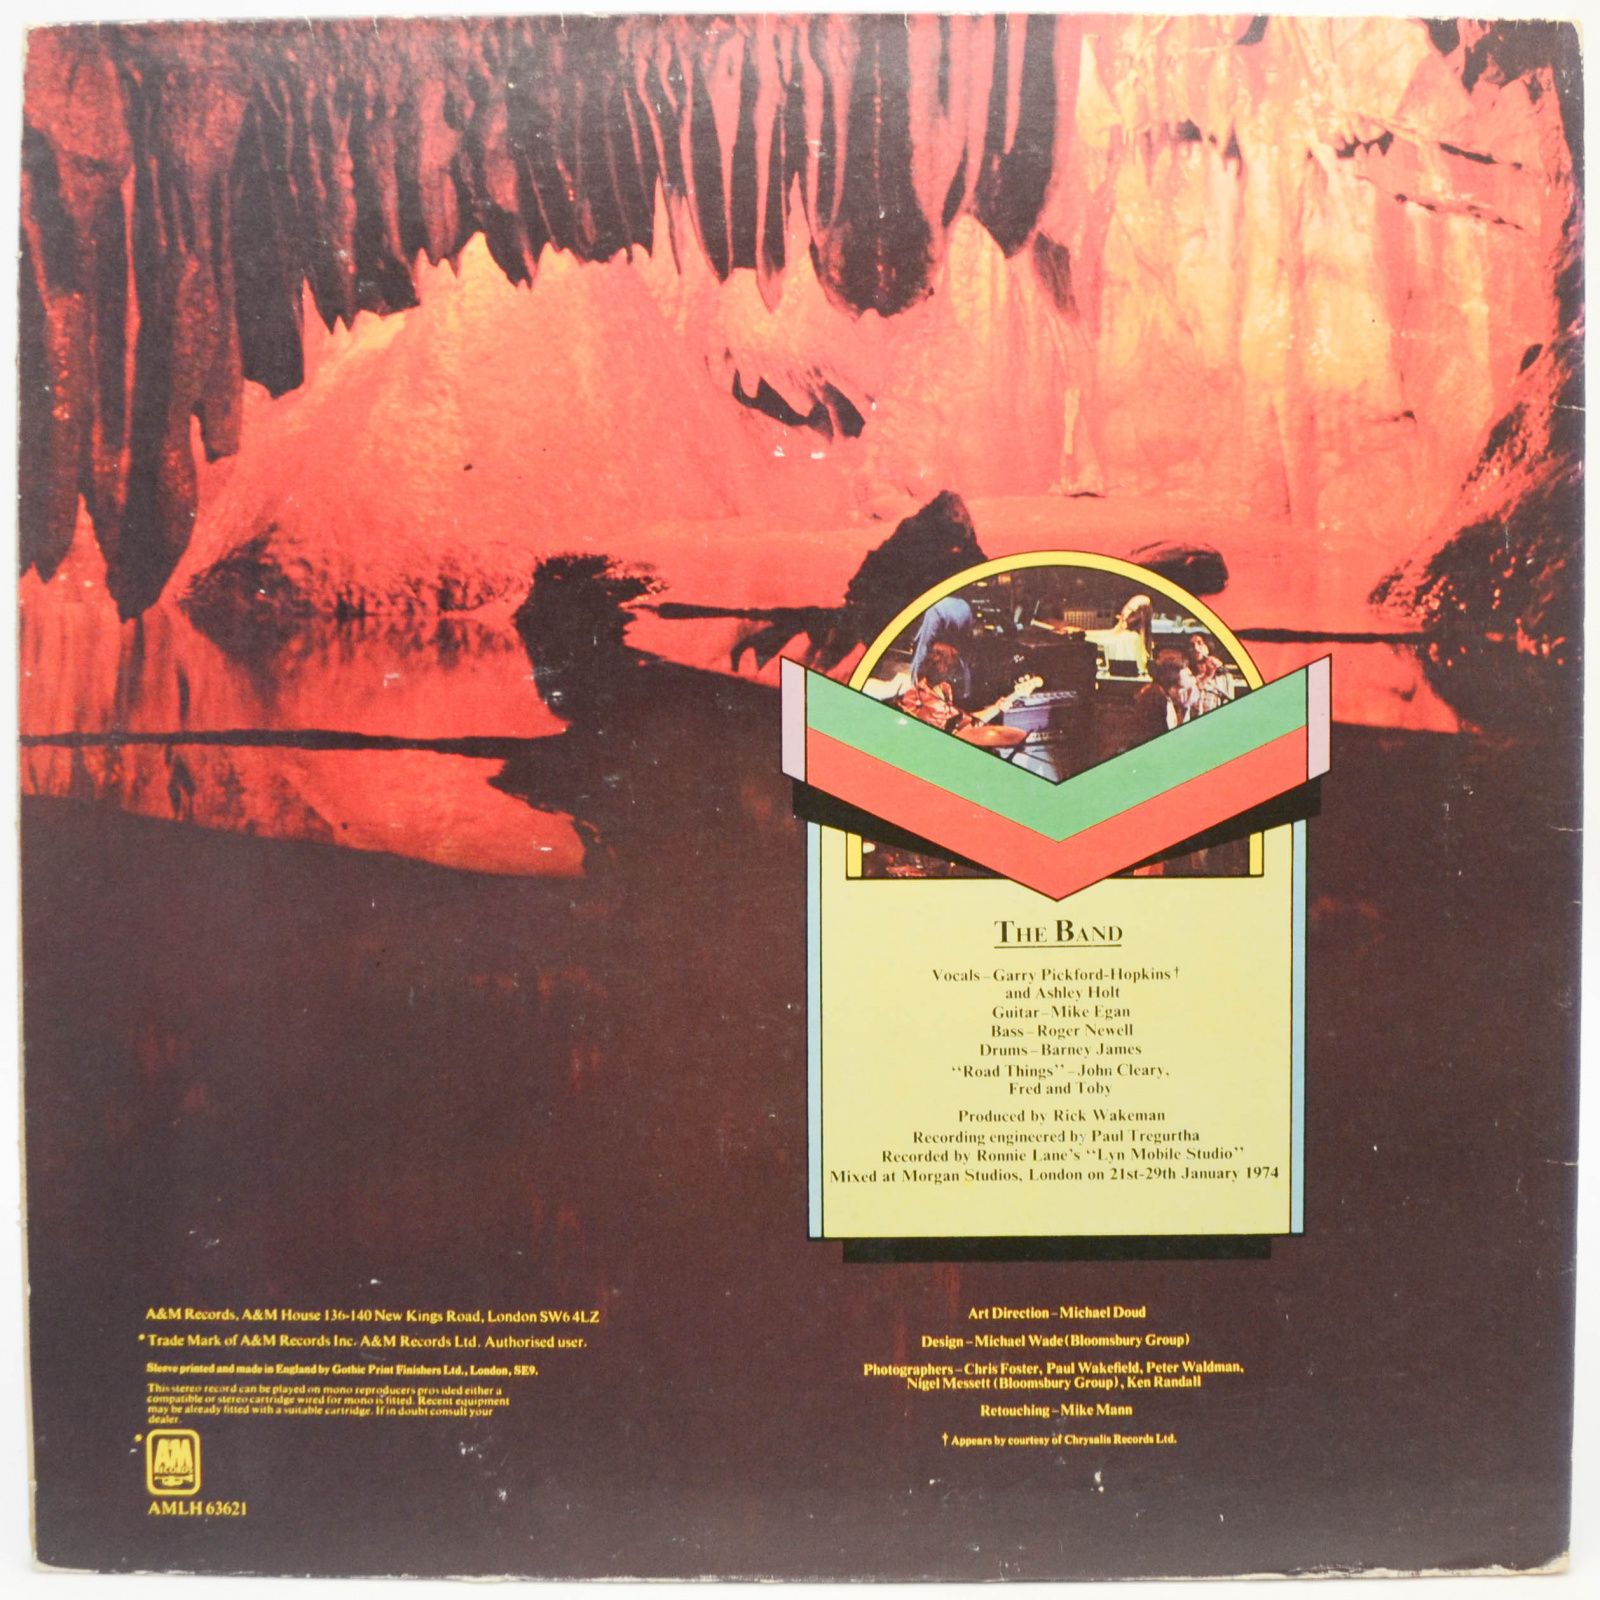 Rick Wakeman — Journey To The Centre Of The Earth (1-st UK, booklet), 1974